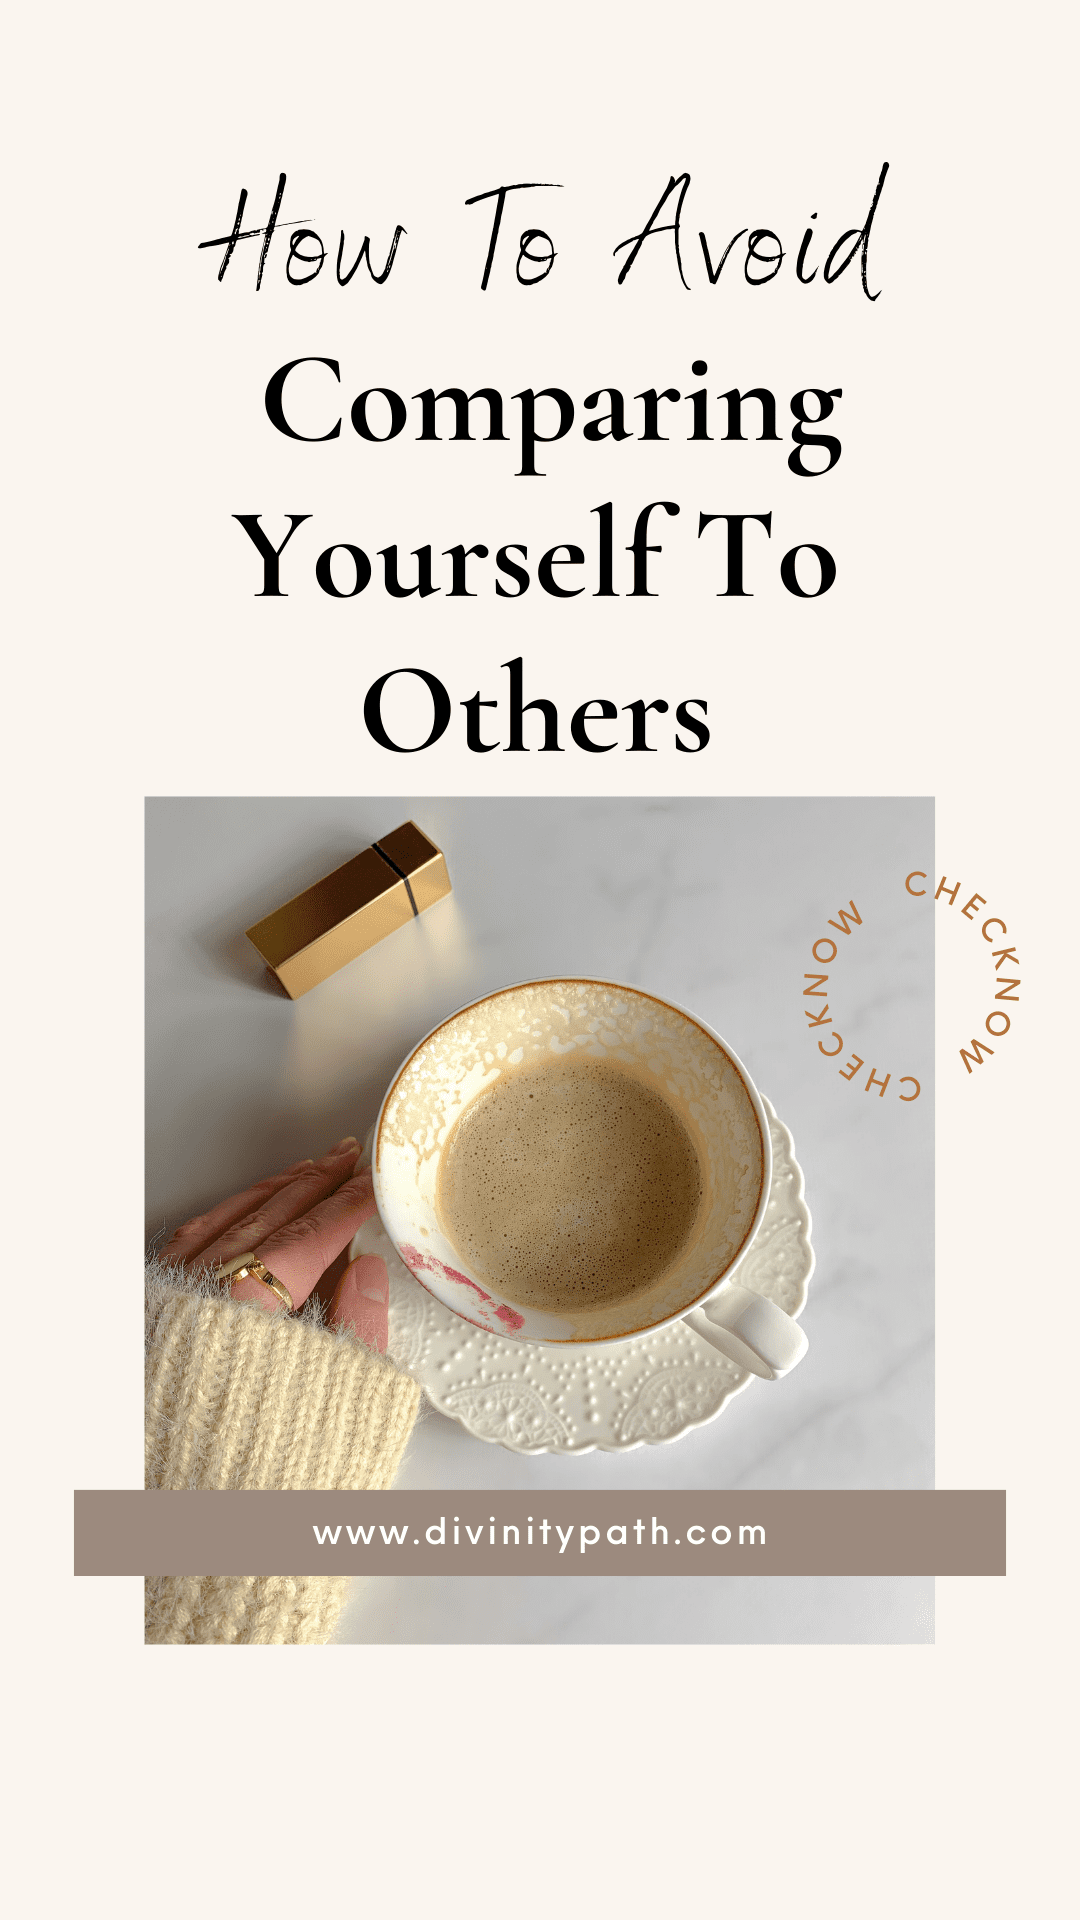 How To Avoid Comparing Yourself To Others: 9 Pro Techniques